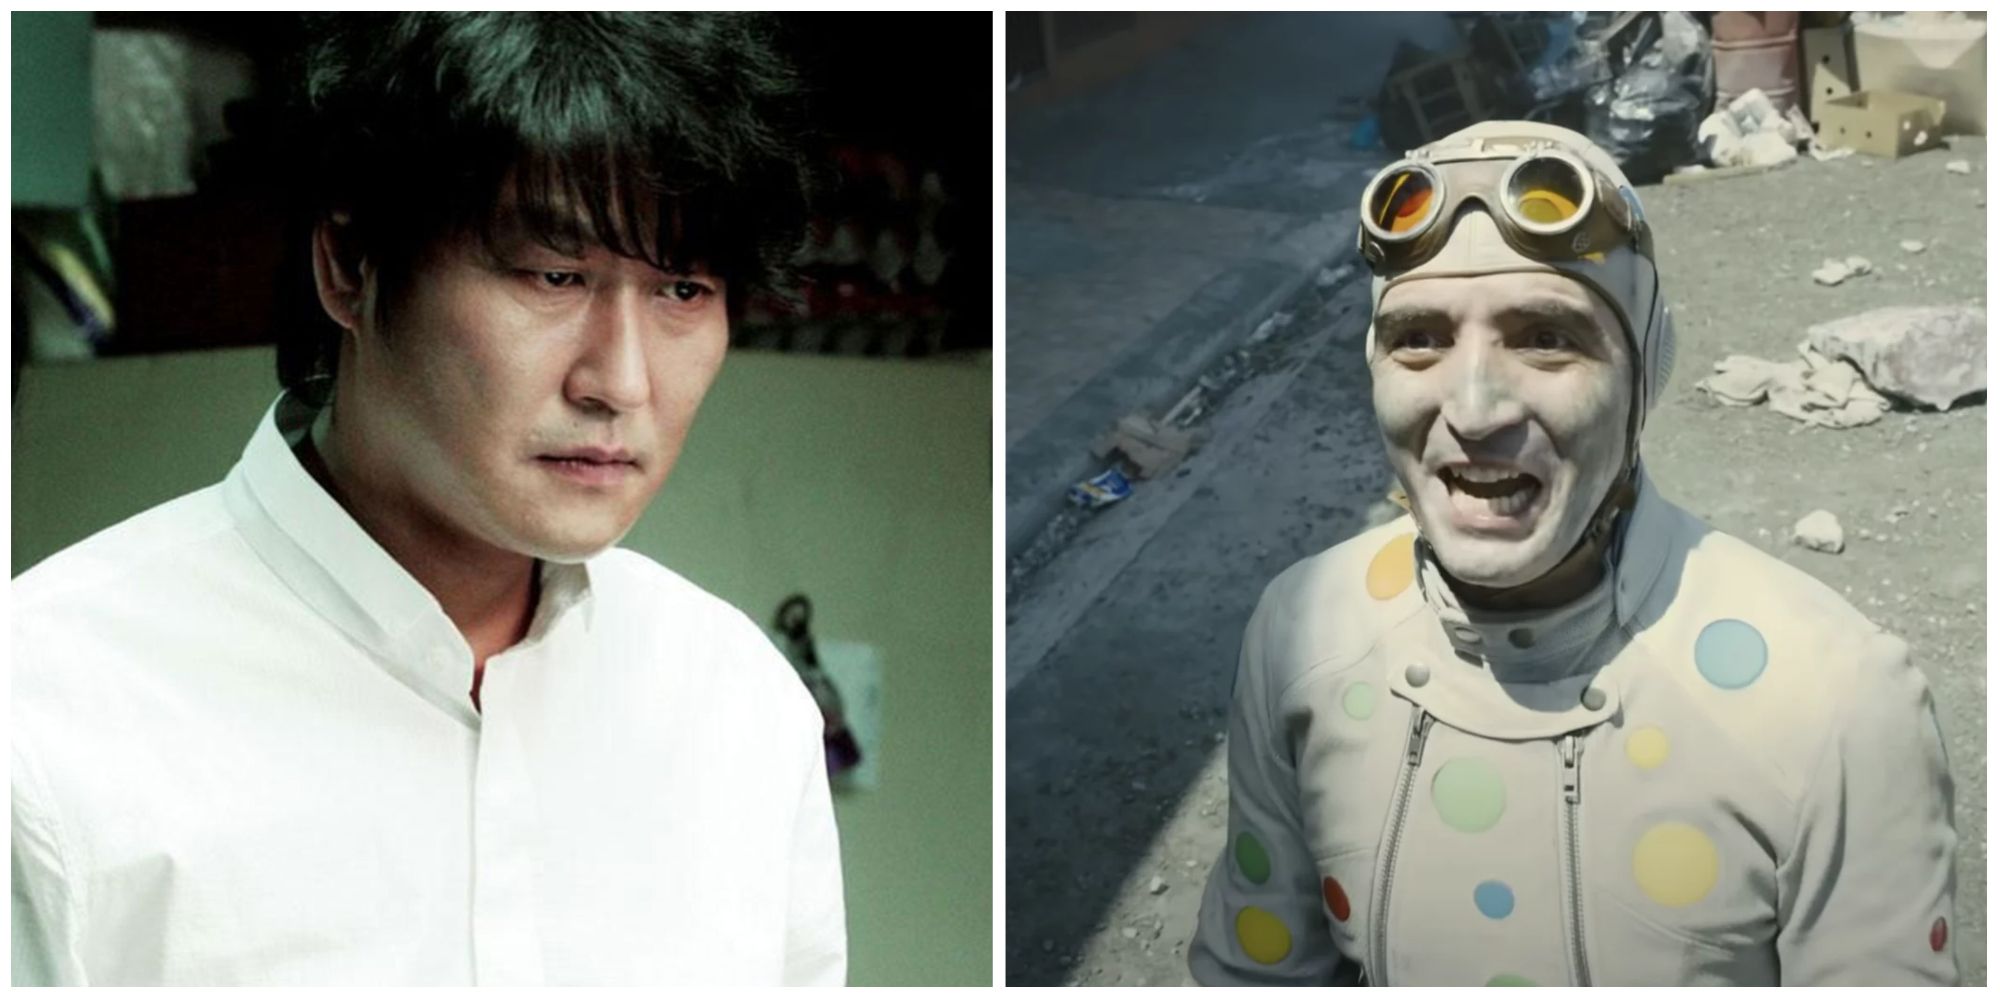 Kang-ho Song in Thirst and the Polka-Dot Man in The Suicide Squad